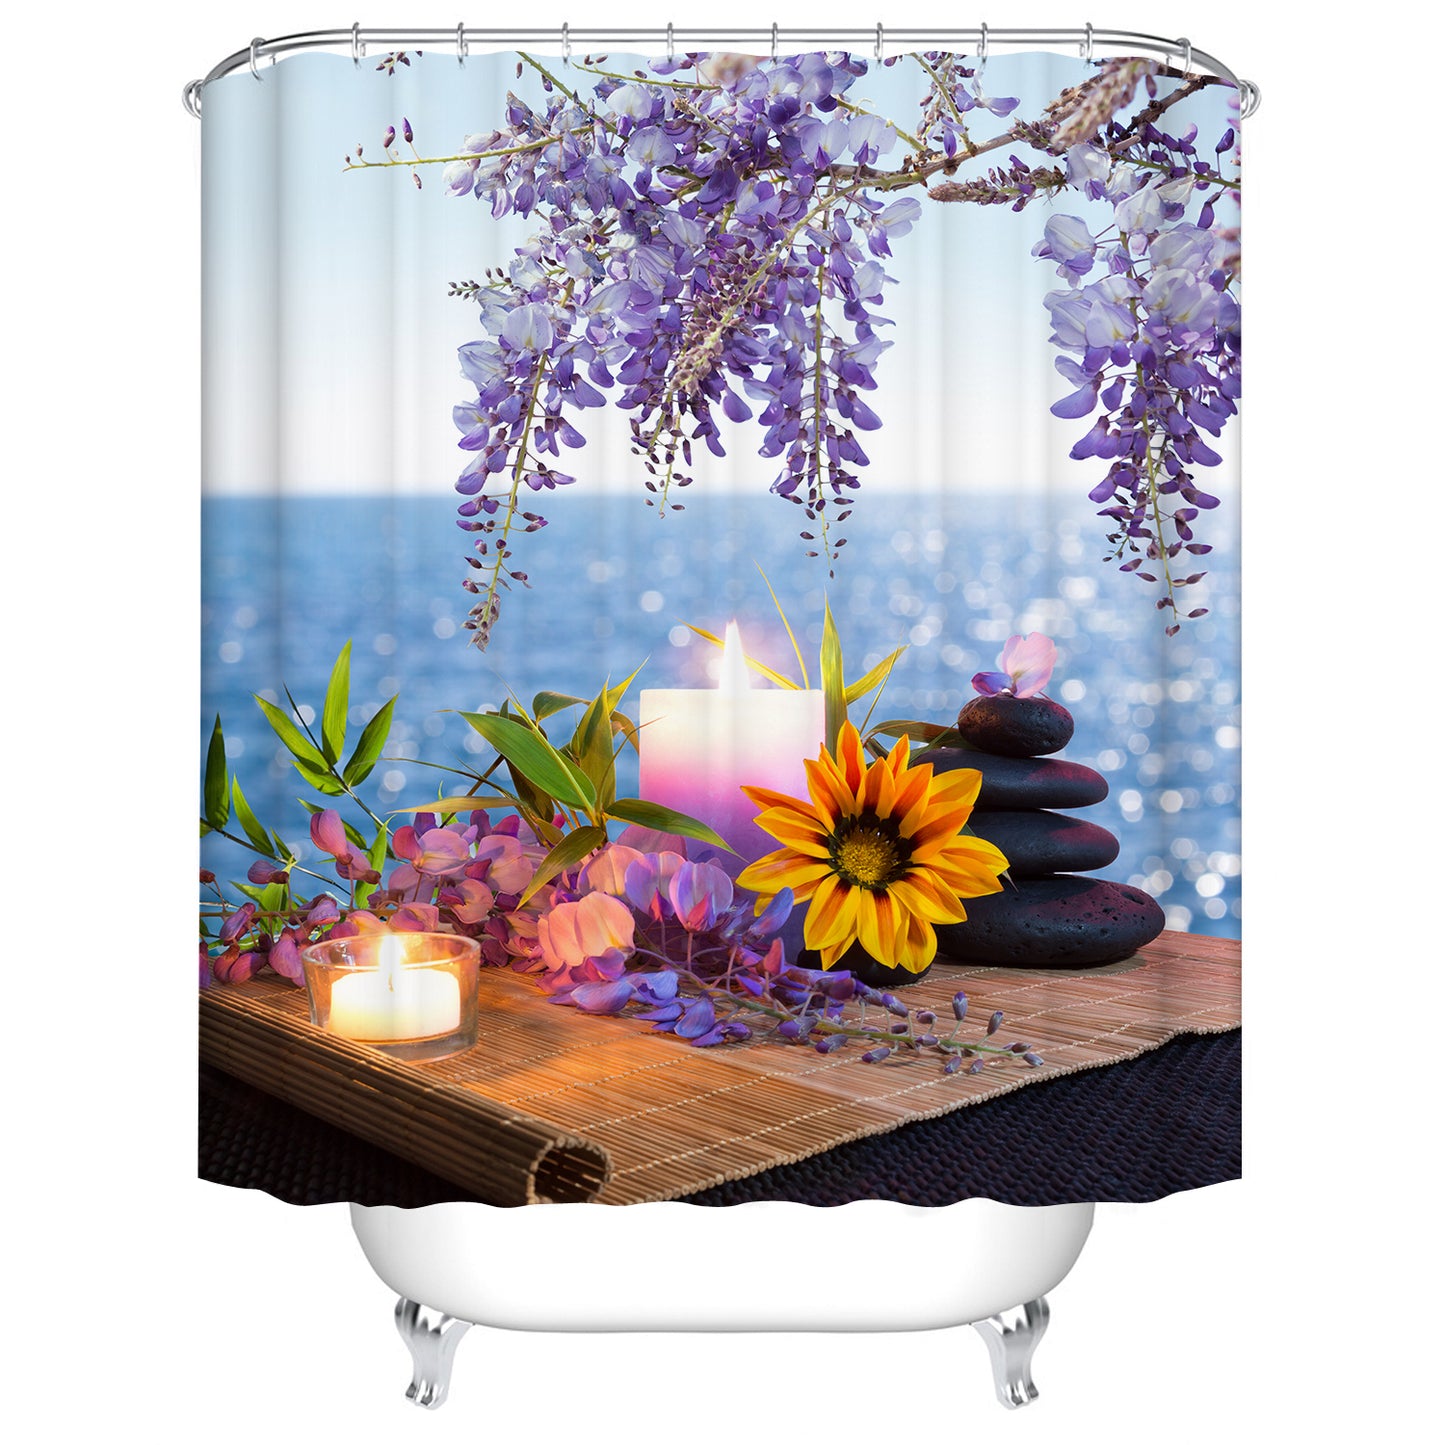 Peaceful Zen Stone with Lilac Flowers Candle Spa Themed Shower Curtain